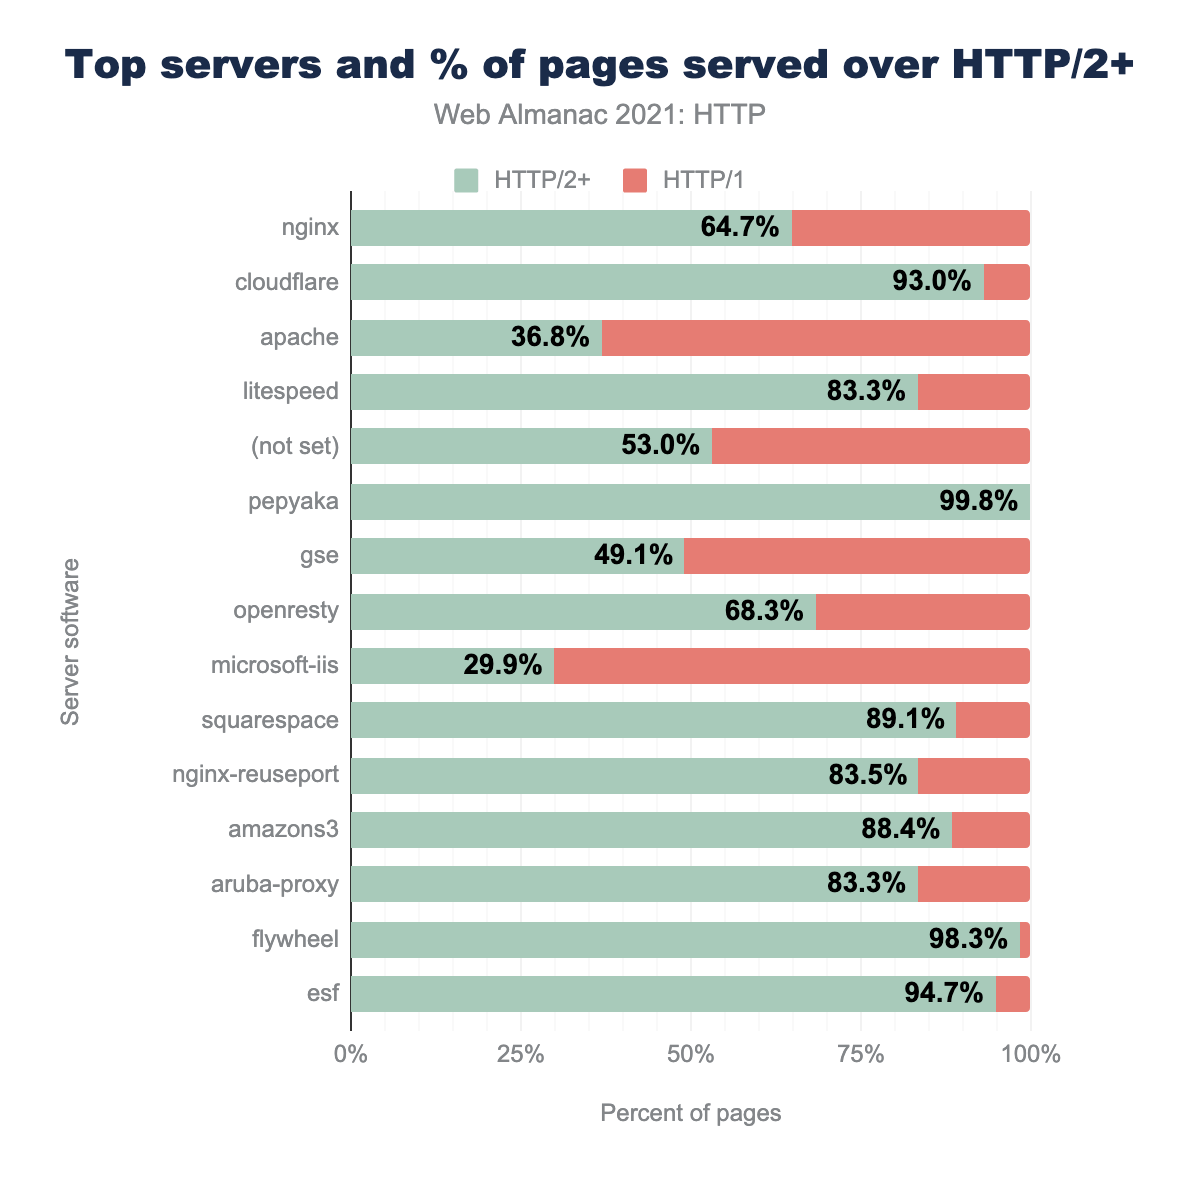 Top servers and % of pages served over HTTP/2+.